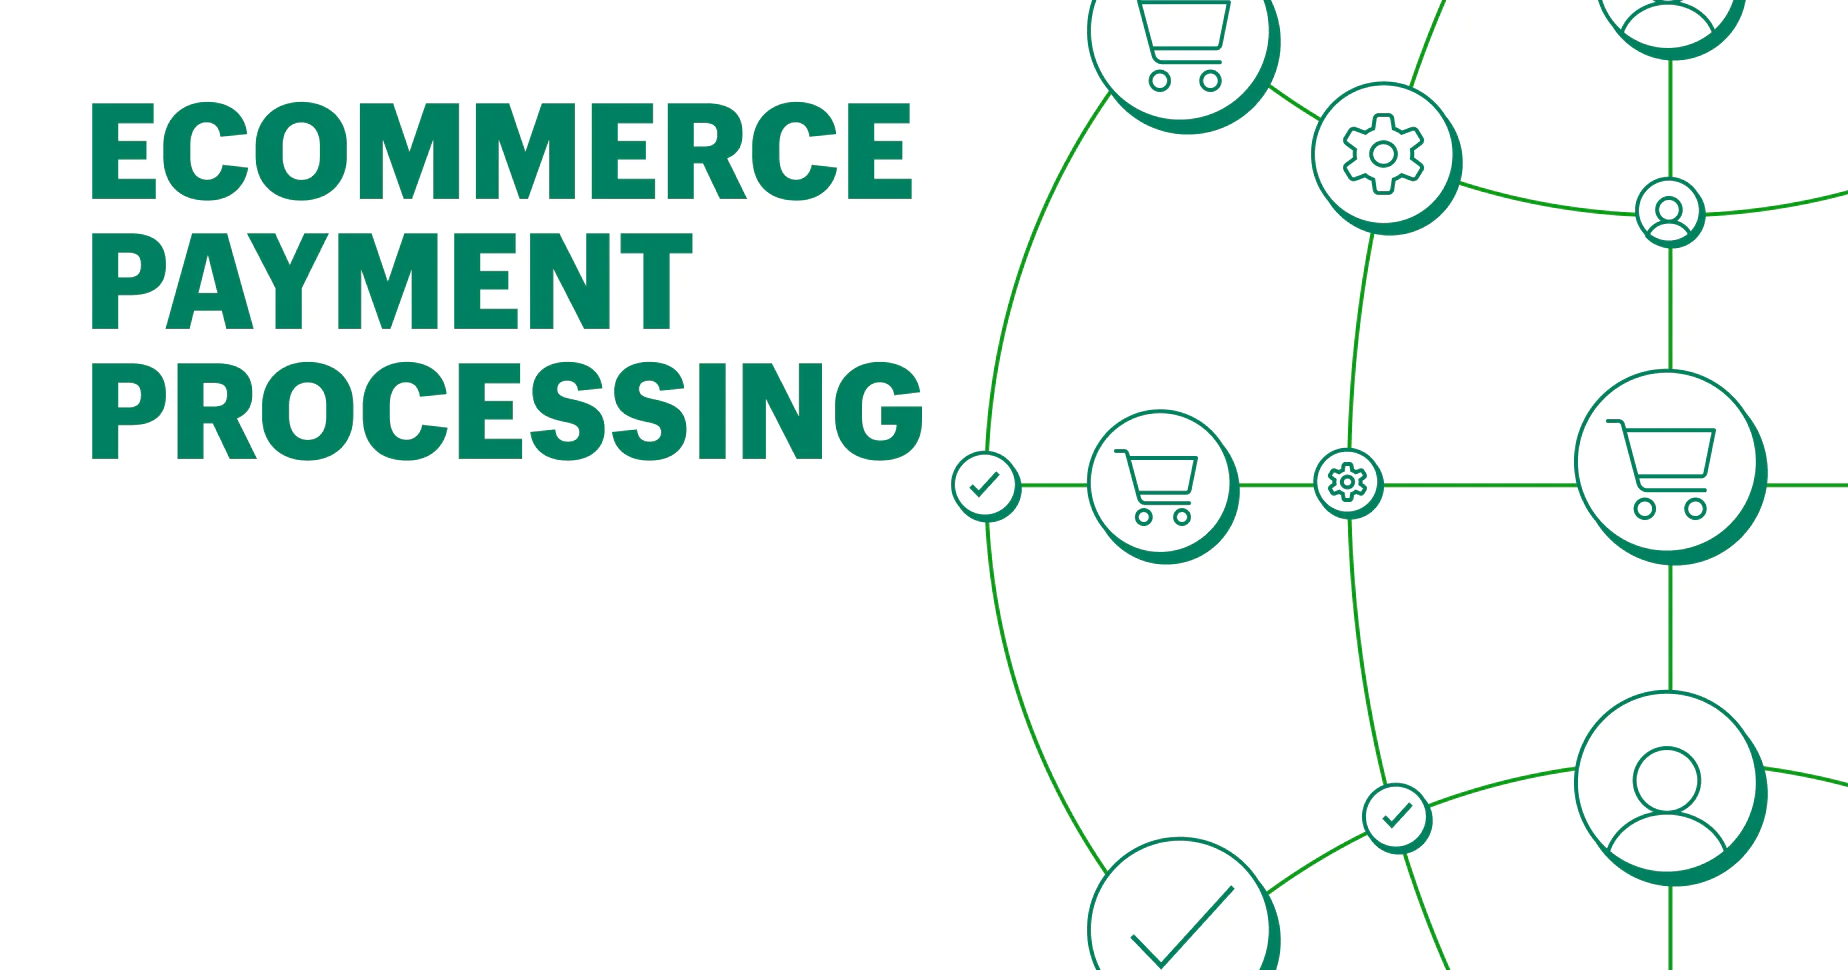 How Does the eCommerce Payment Process Work?